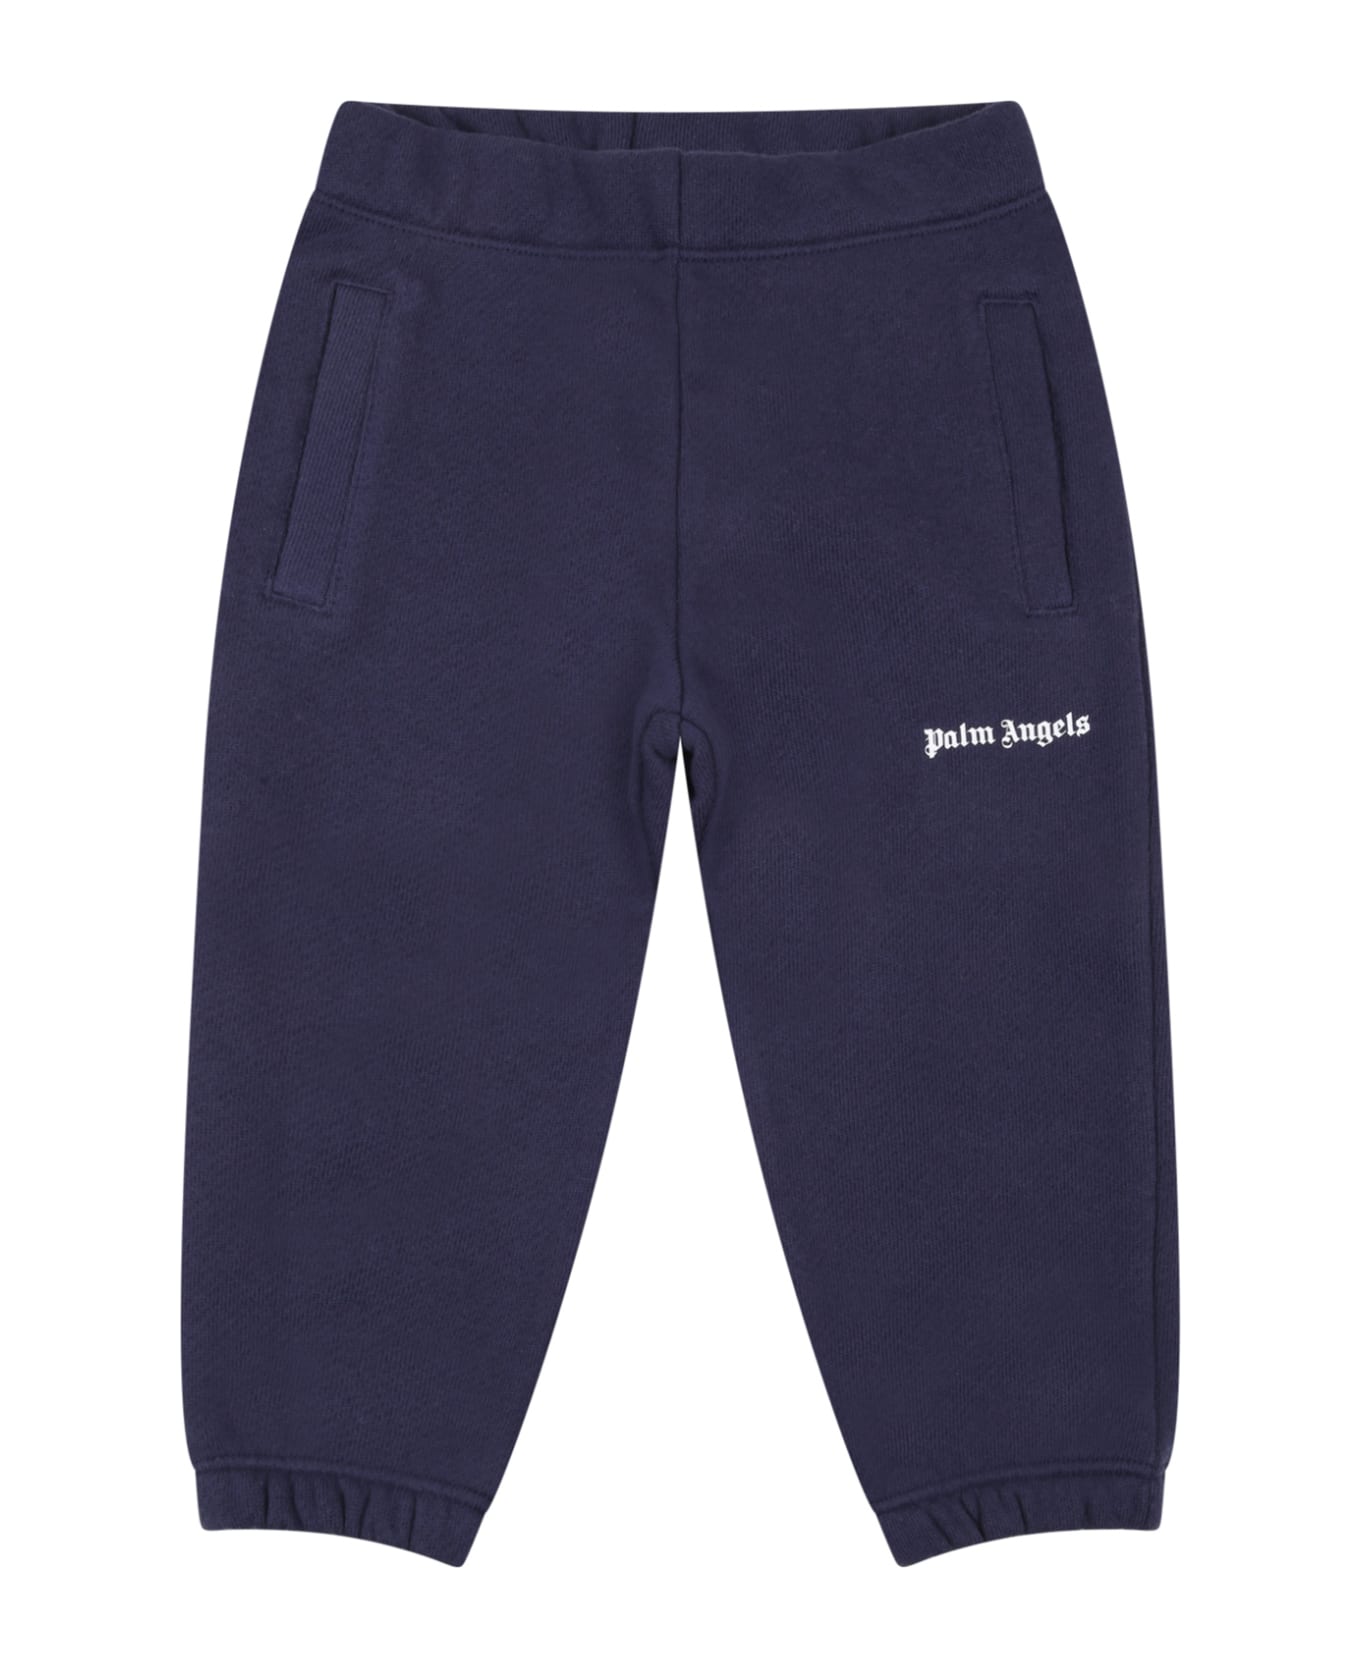 Palm Angels Blue Sweatpants For Baby Boy With White Logo - Blue Navy/White